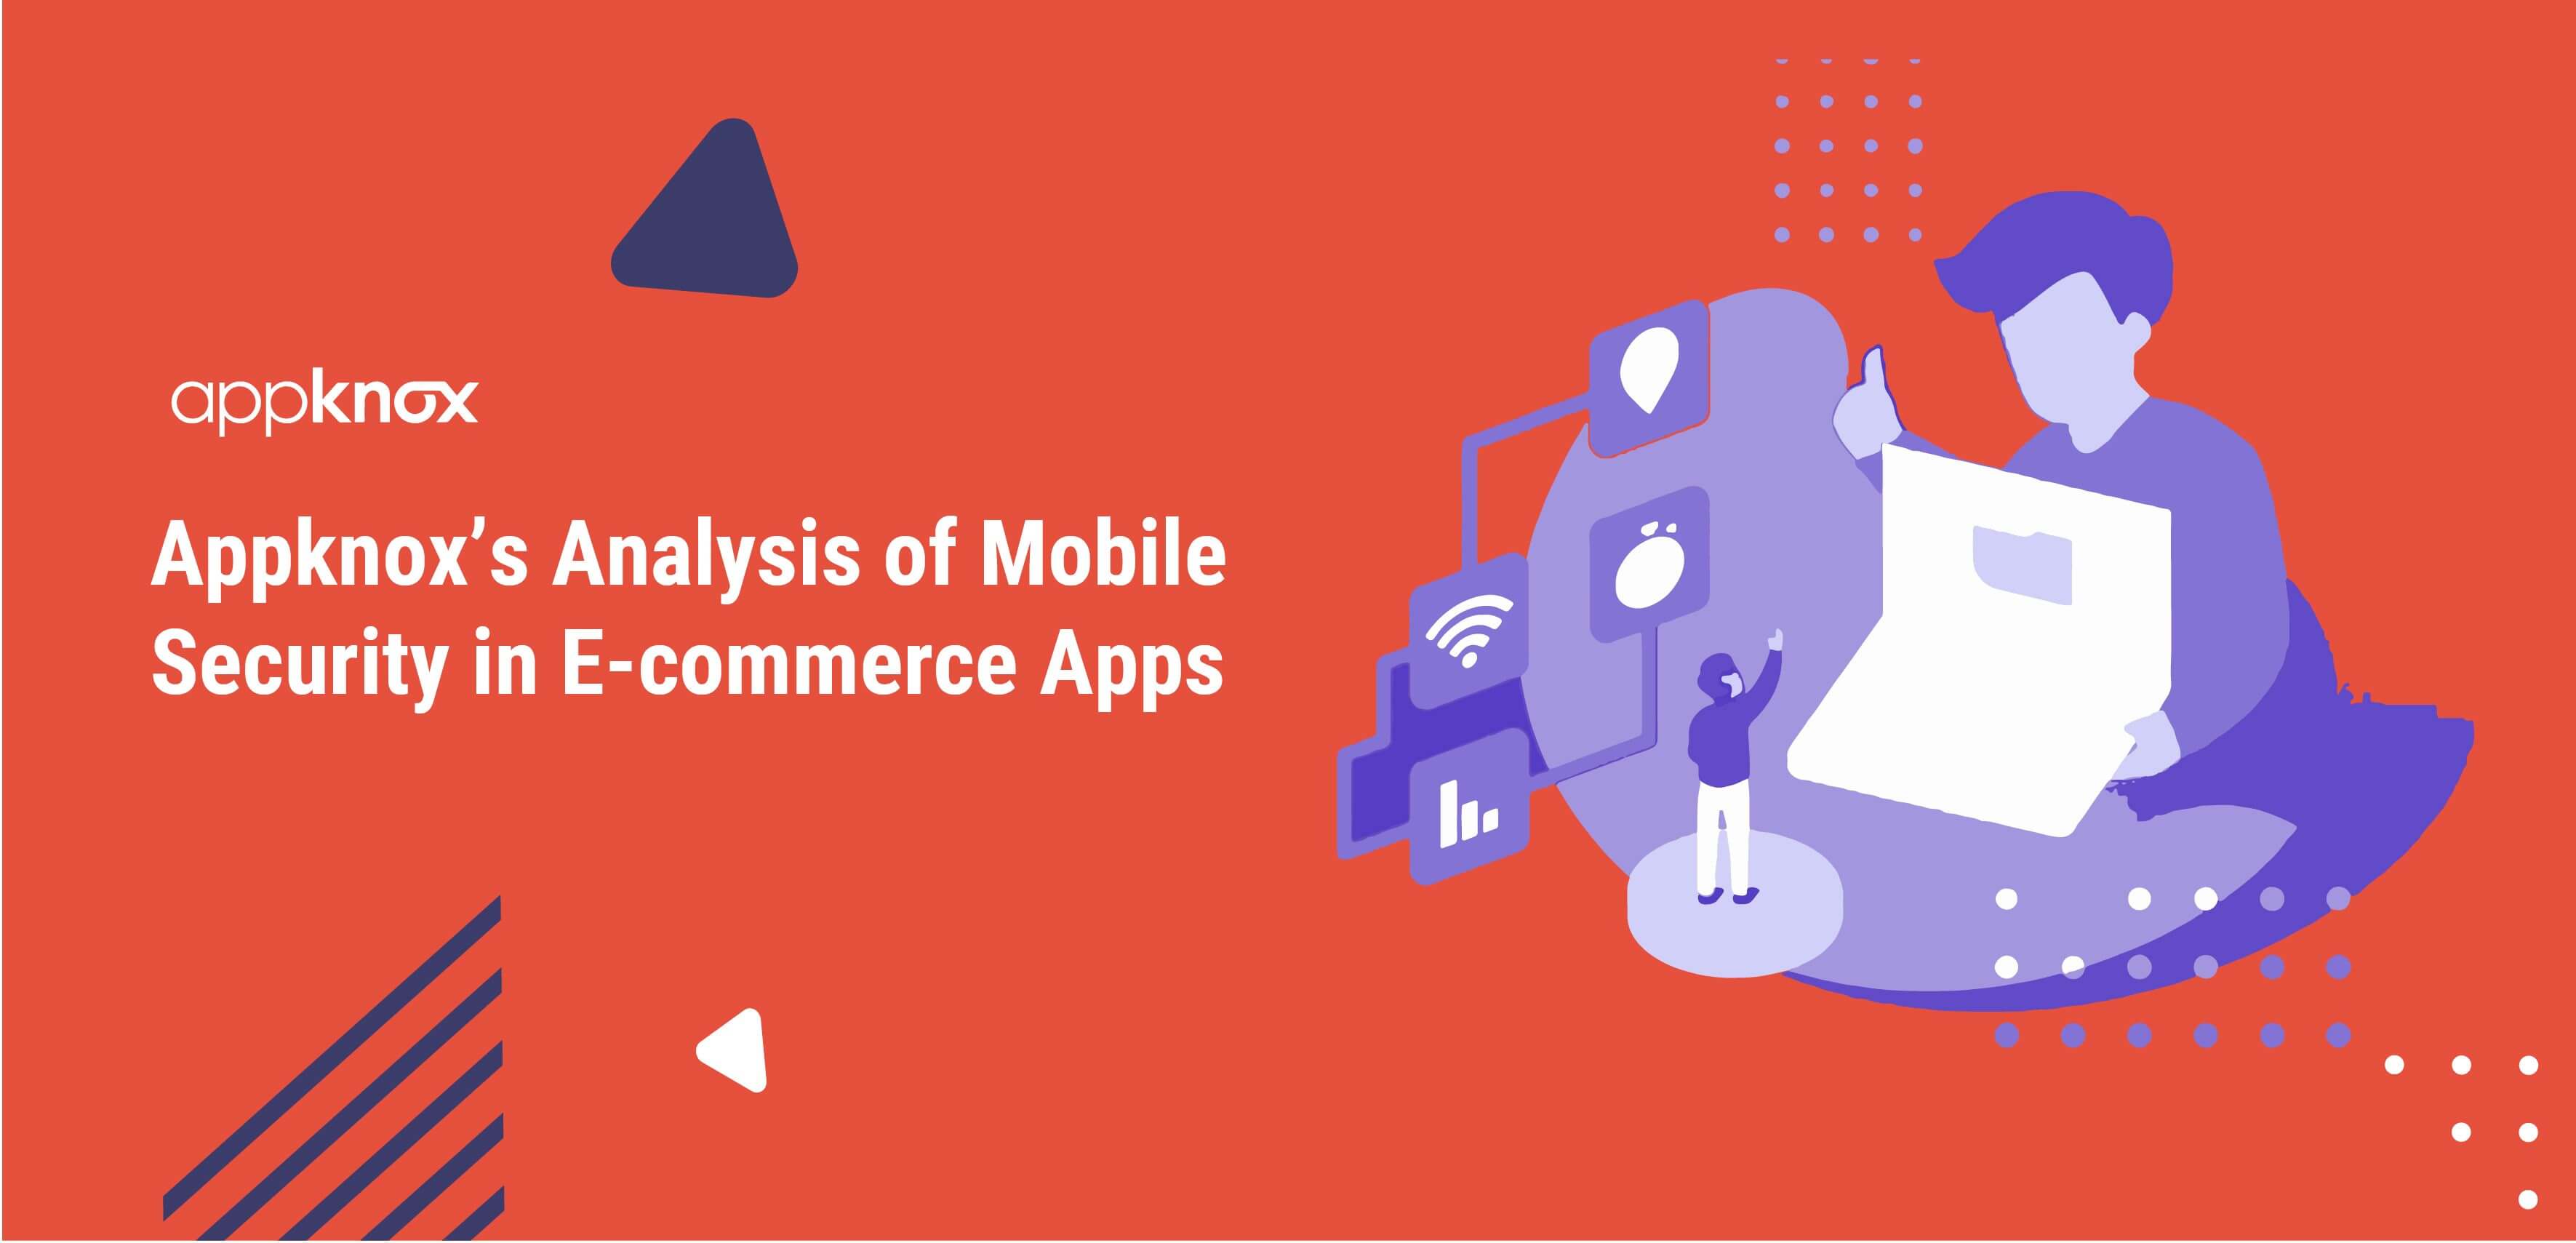 Global Analysis Of Mobile Security In E-commerce Apps